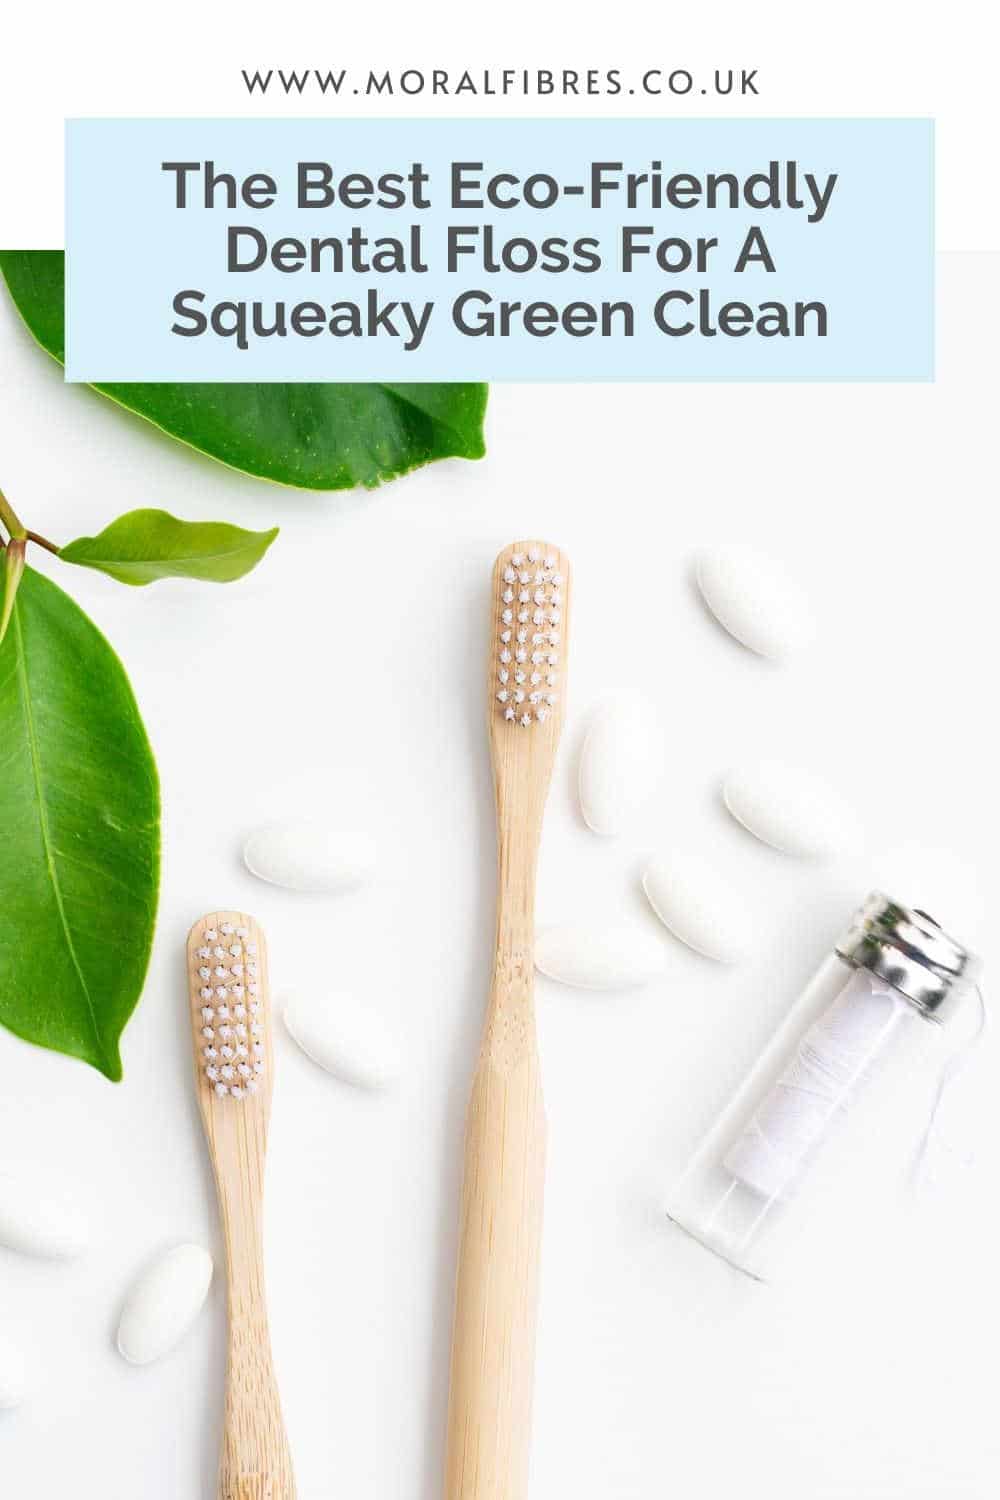 Two wooden toothbrushes and dental floss in a glass jar, with a blue text box that says the best eco-friendly dental floss for a squeaky green clean